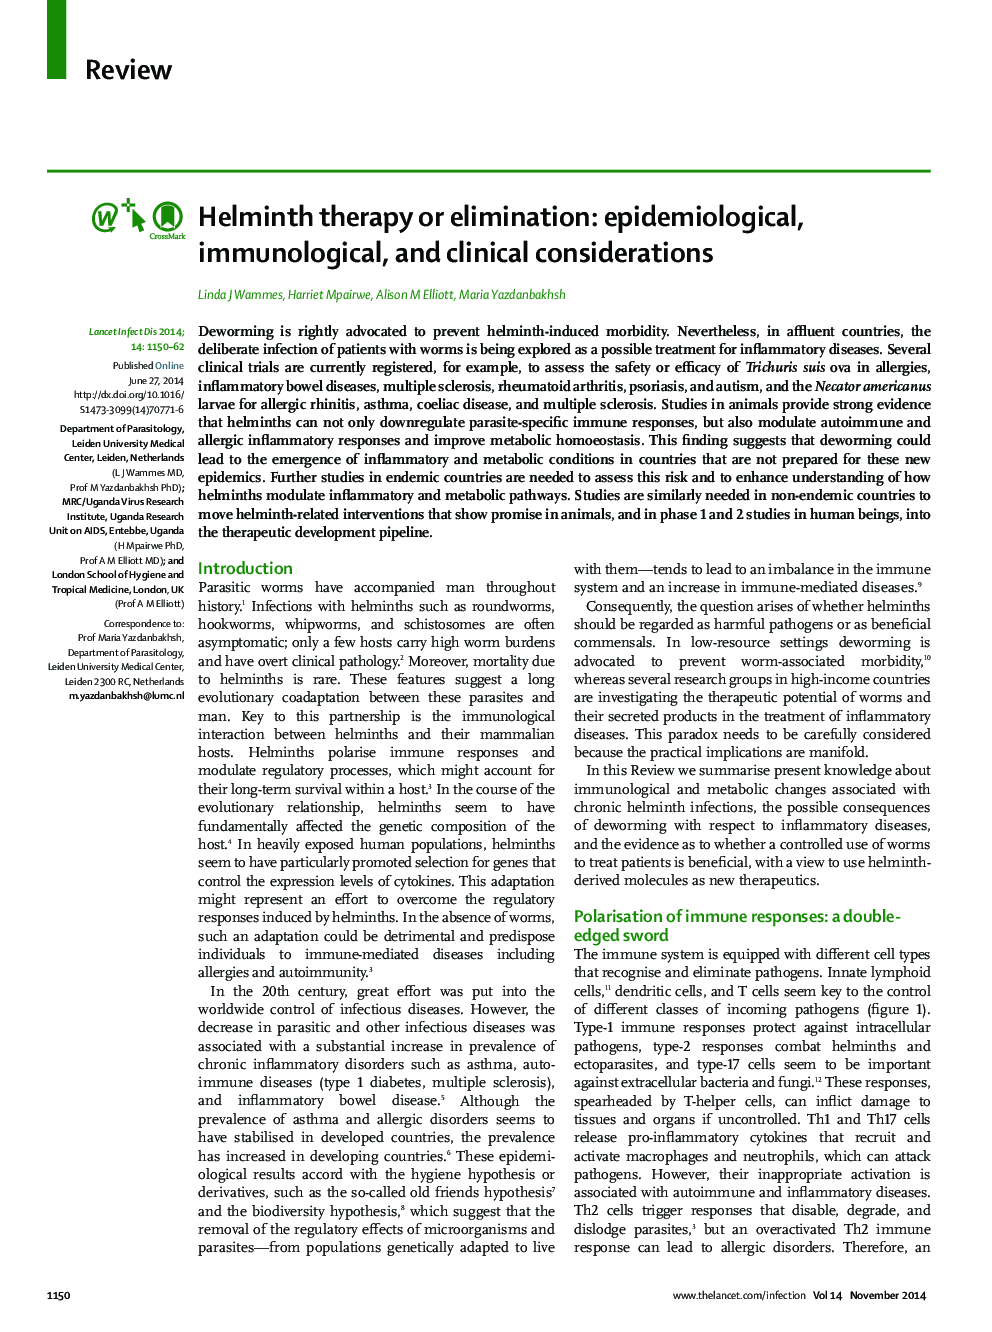 Helminth therapy or elimination: epidemiological, immunological, and clinical considerations